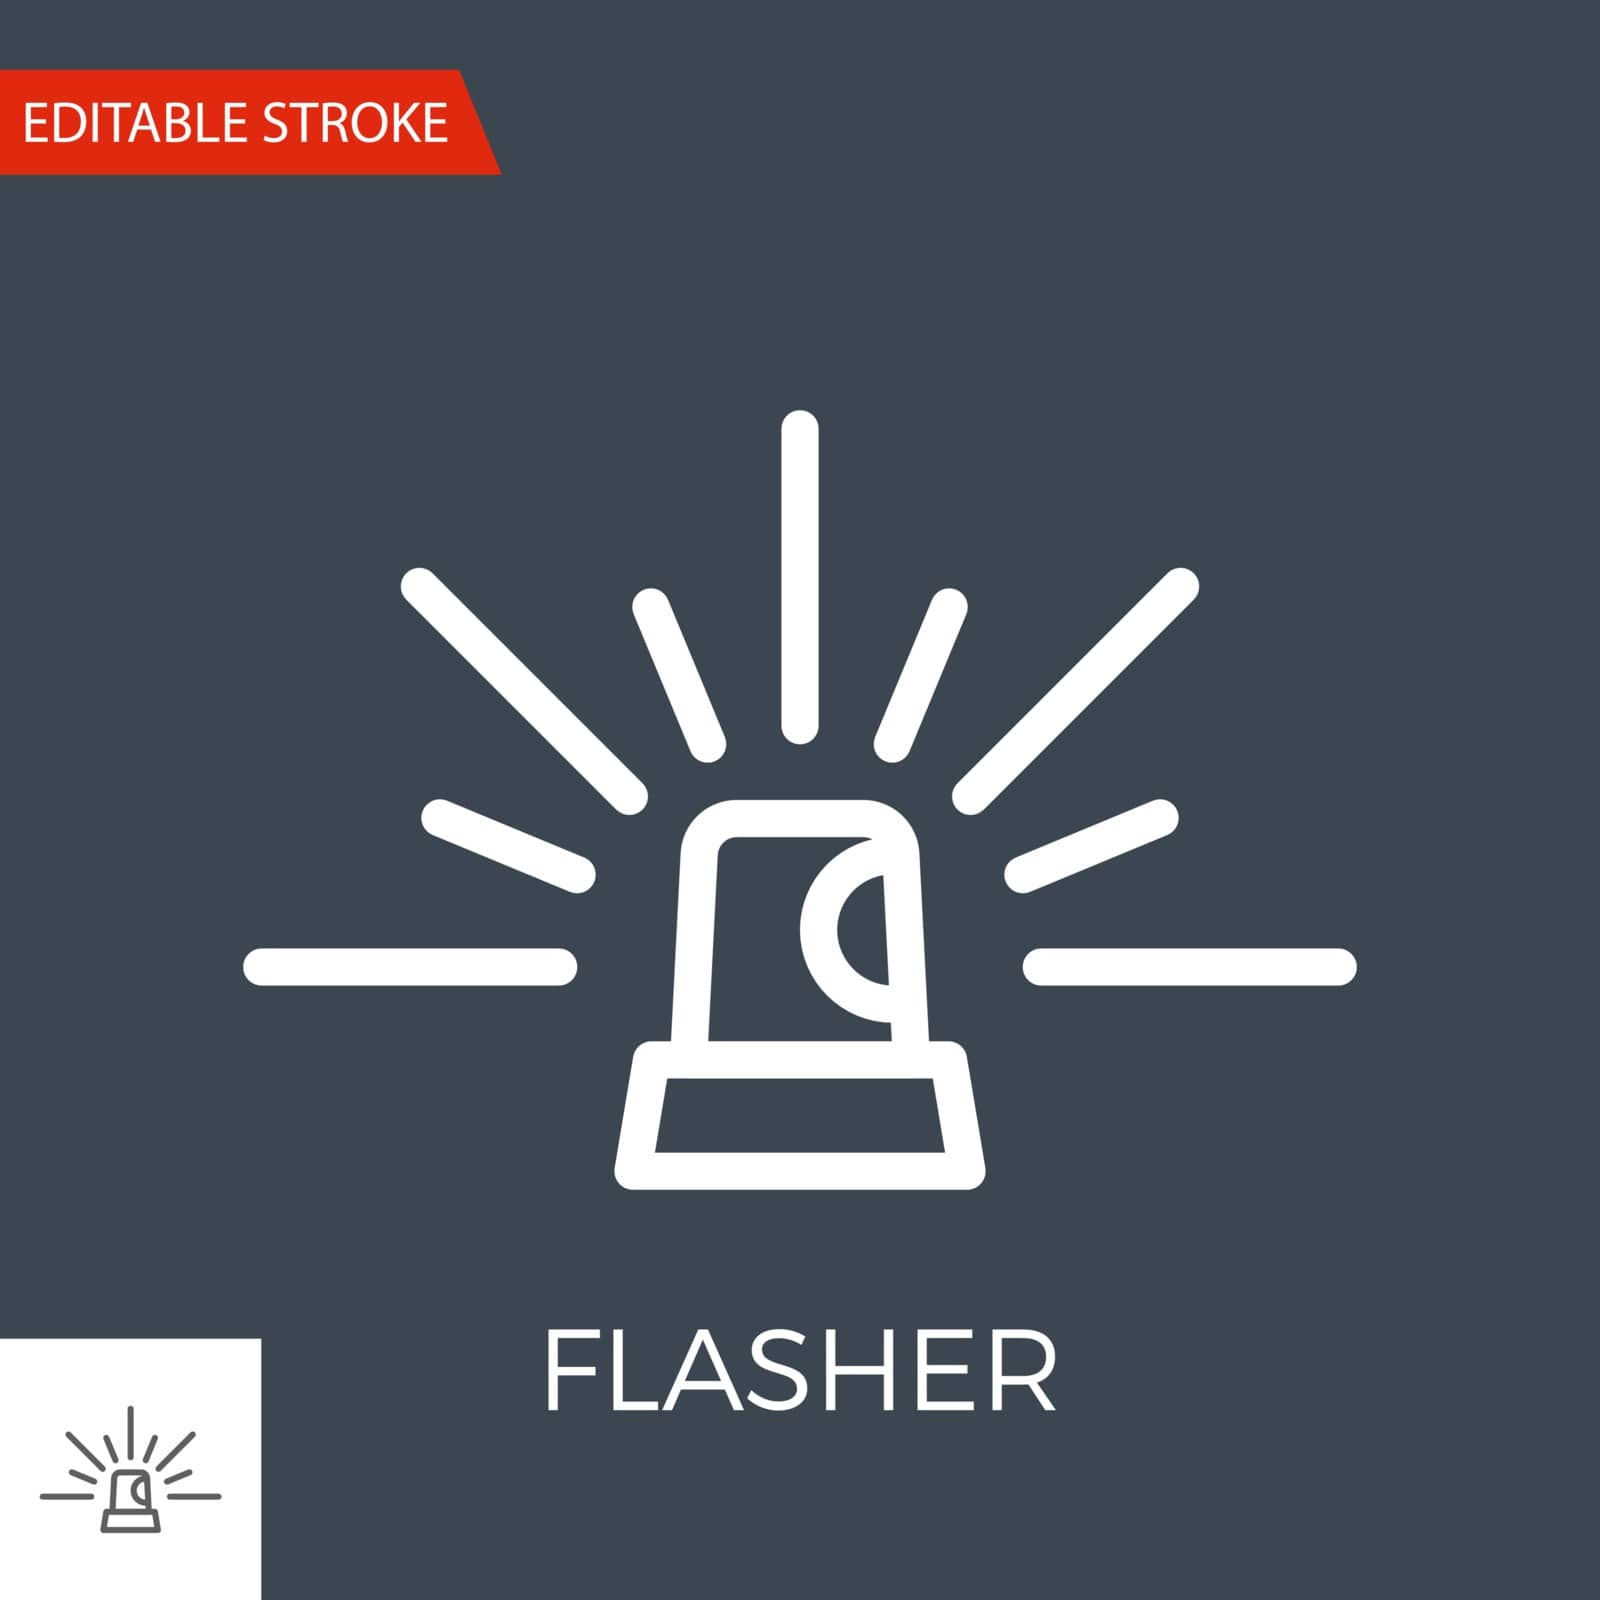 Flasher Thin Line Vector Icon. Flat Icon Isolated on the Black Background. Editable Stroke EPS file. Vector illustration.